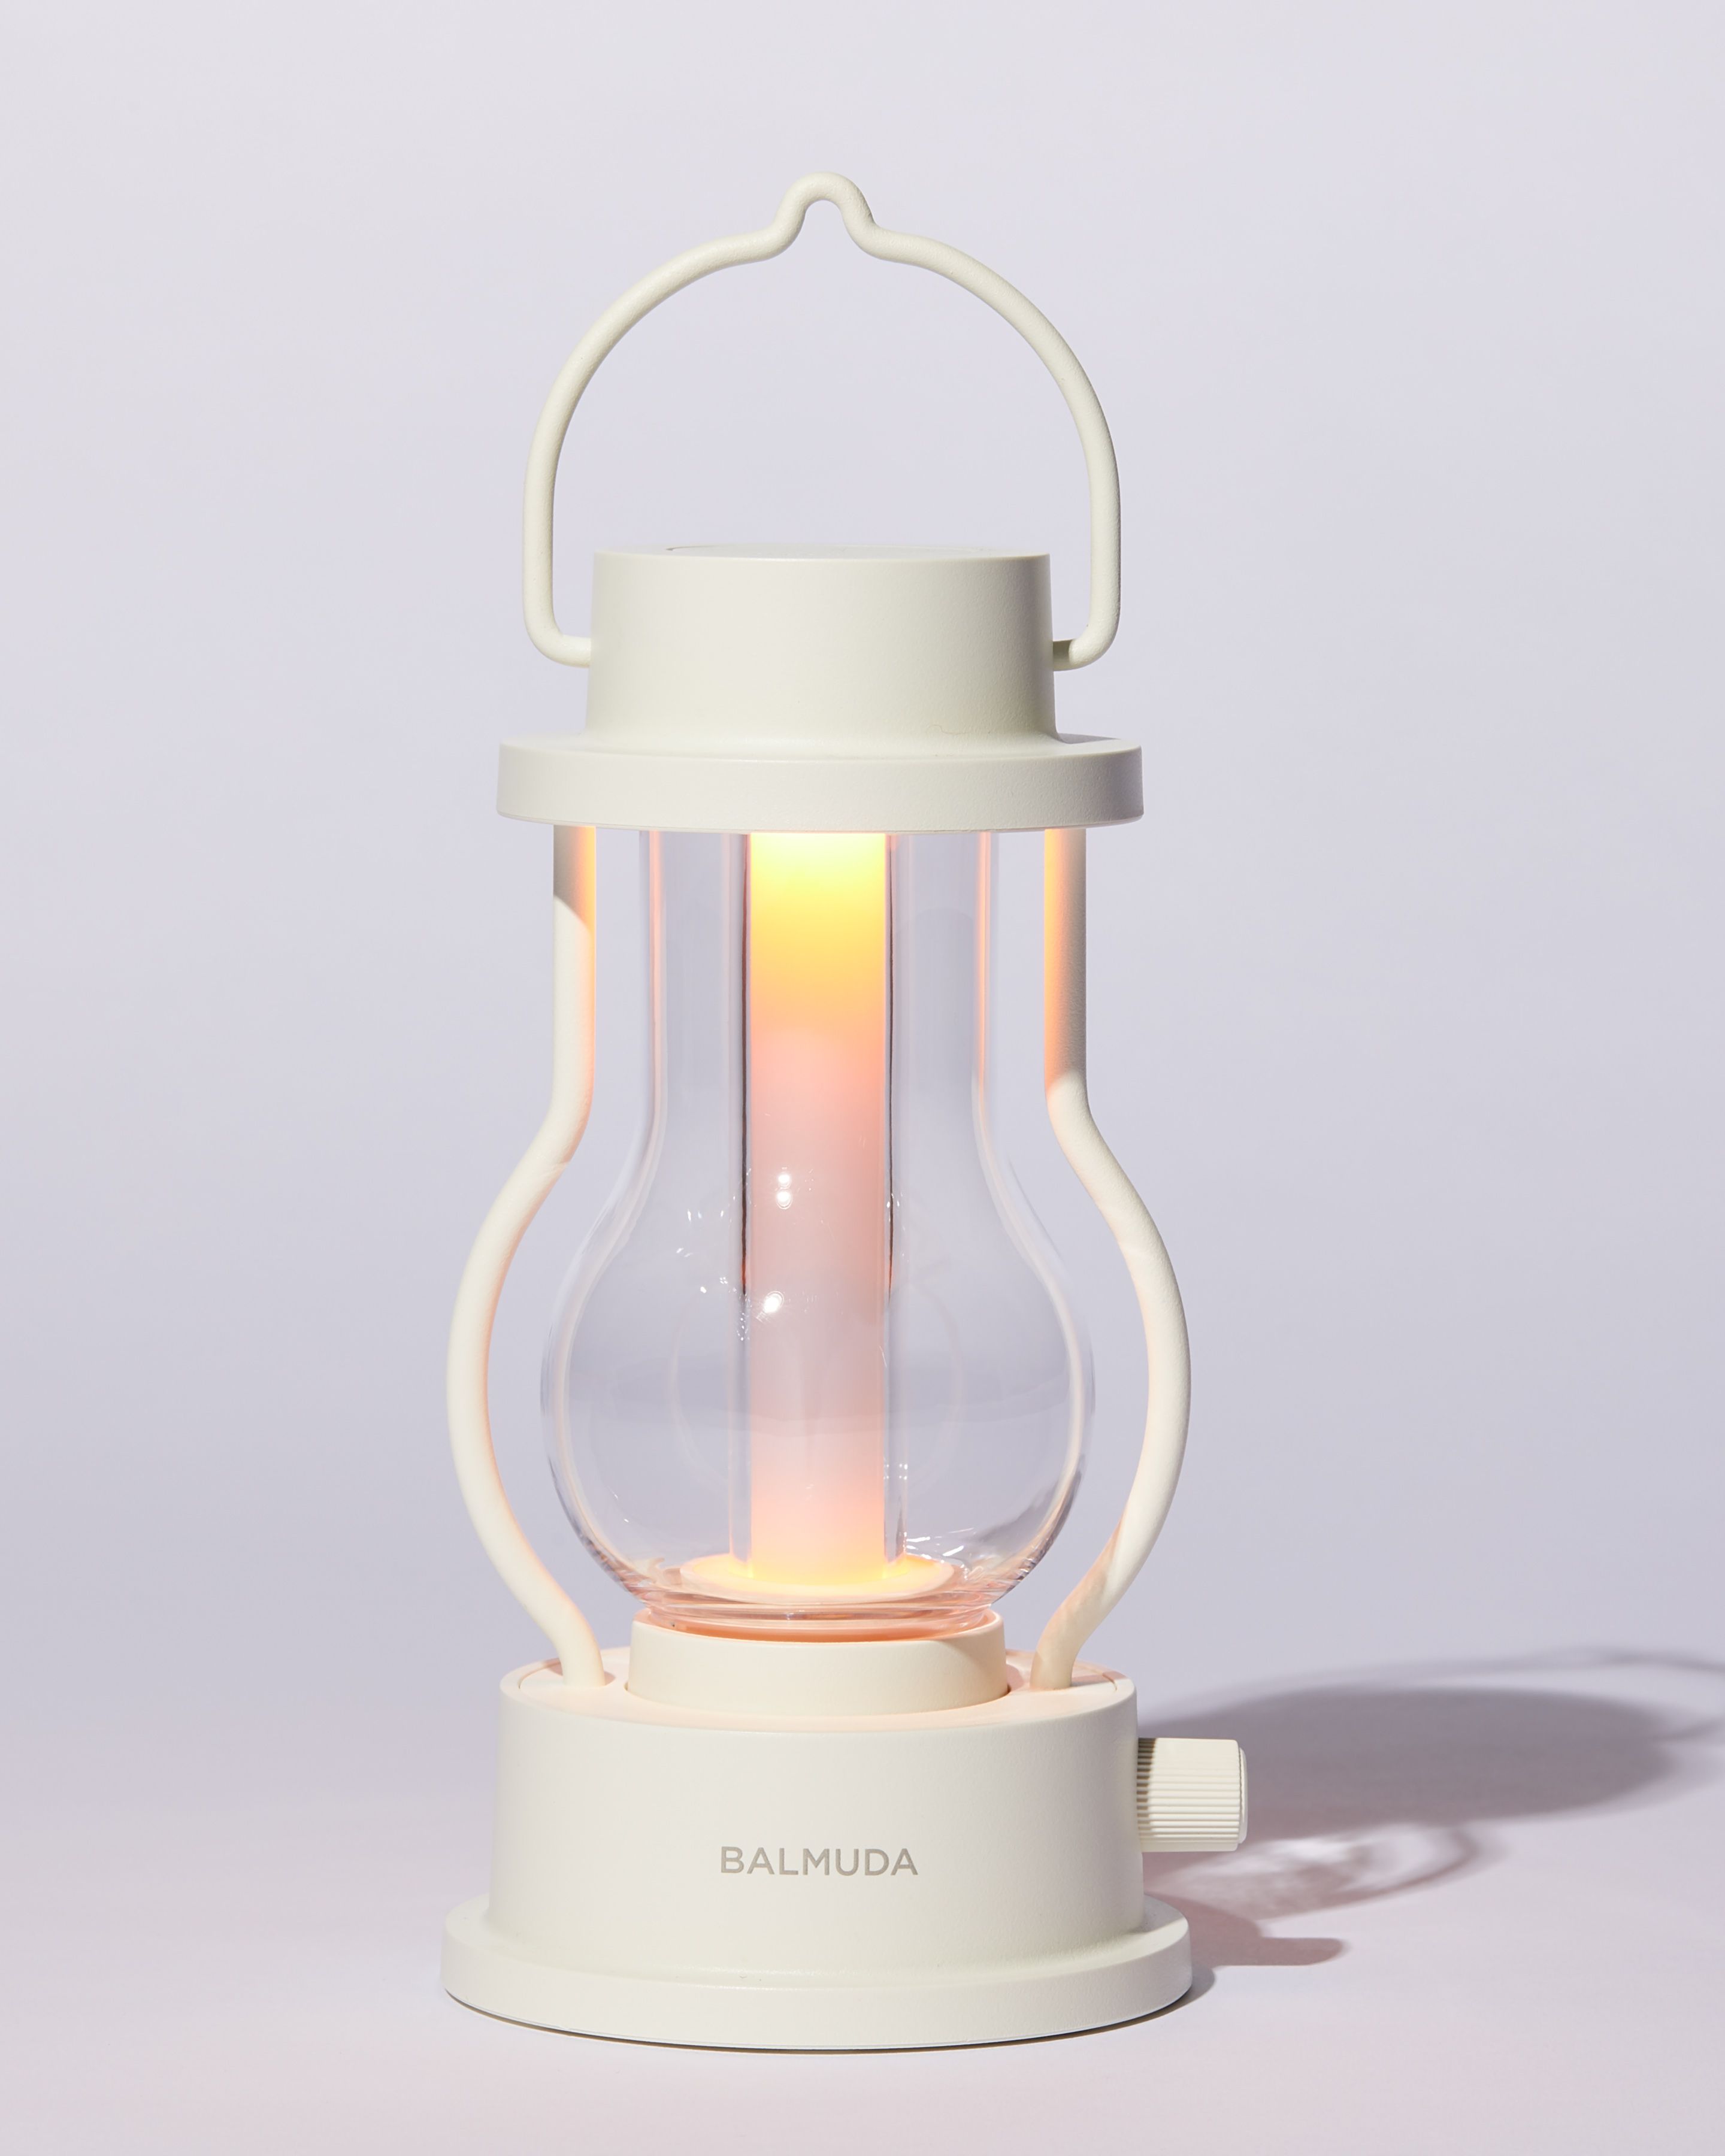 The Balmuda Lantern Is a Thing of Ambiance Setting Beauty